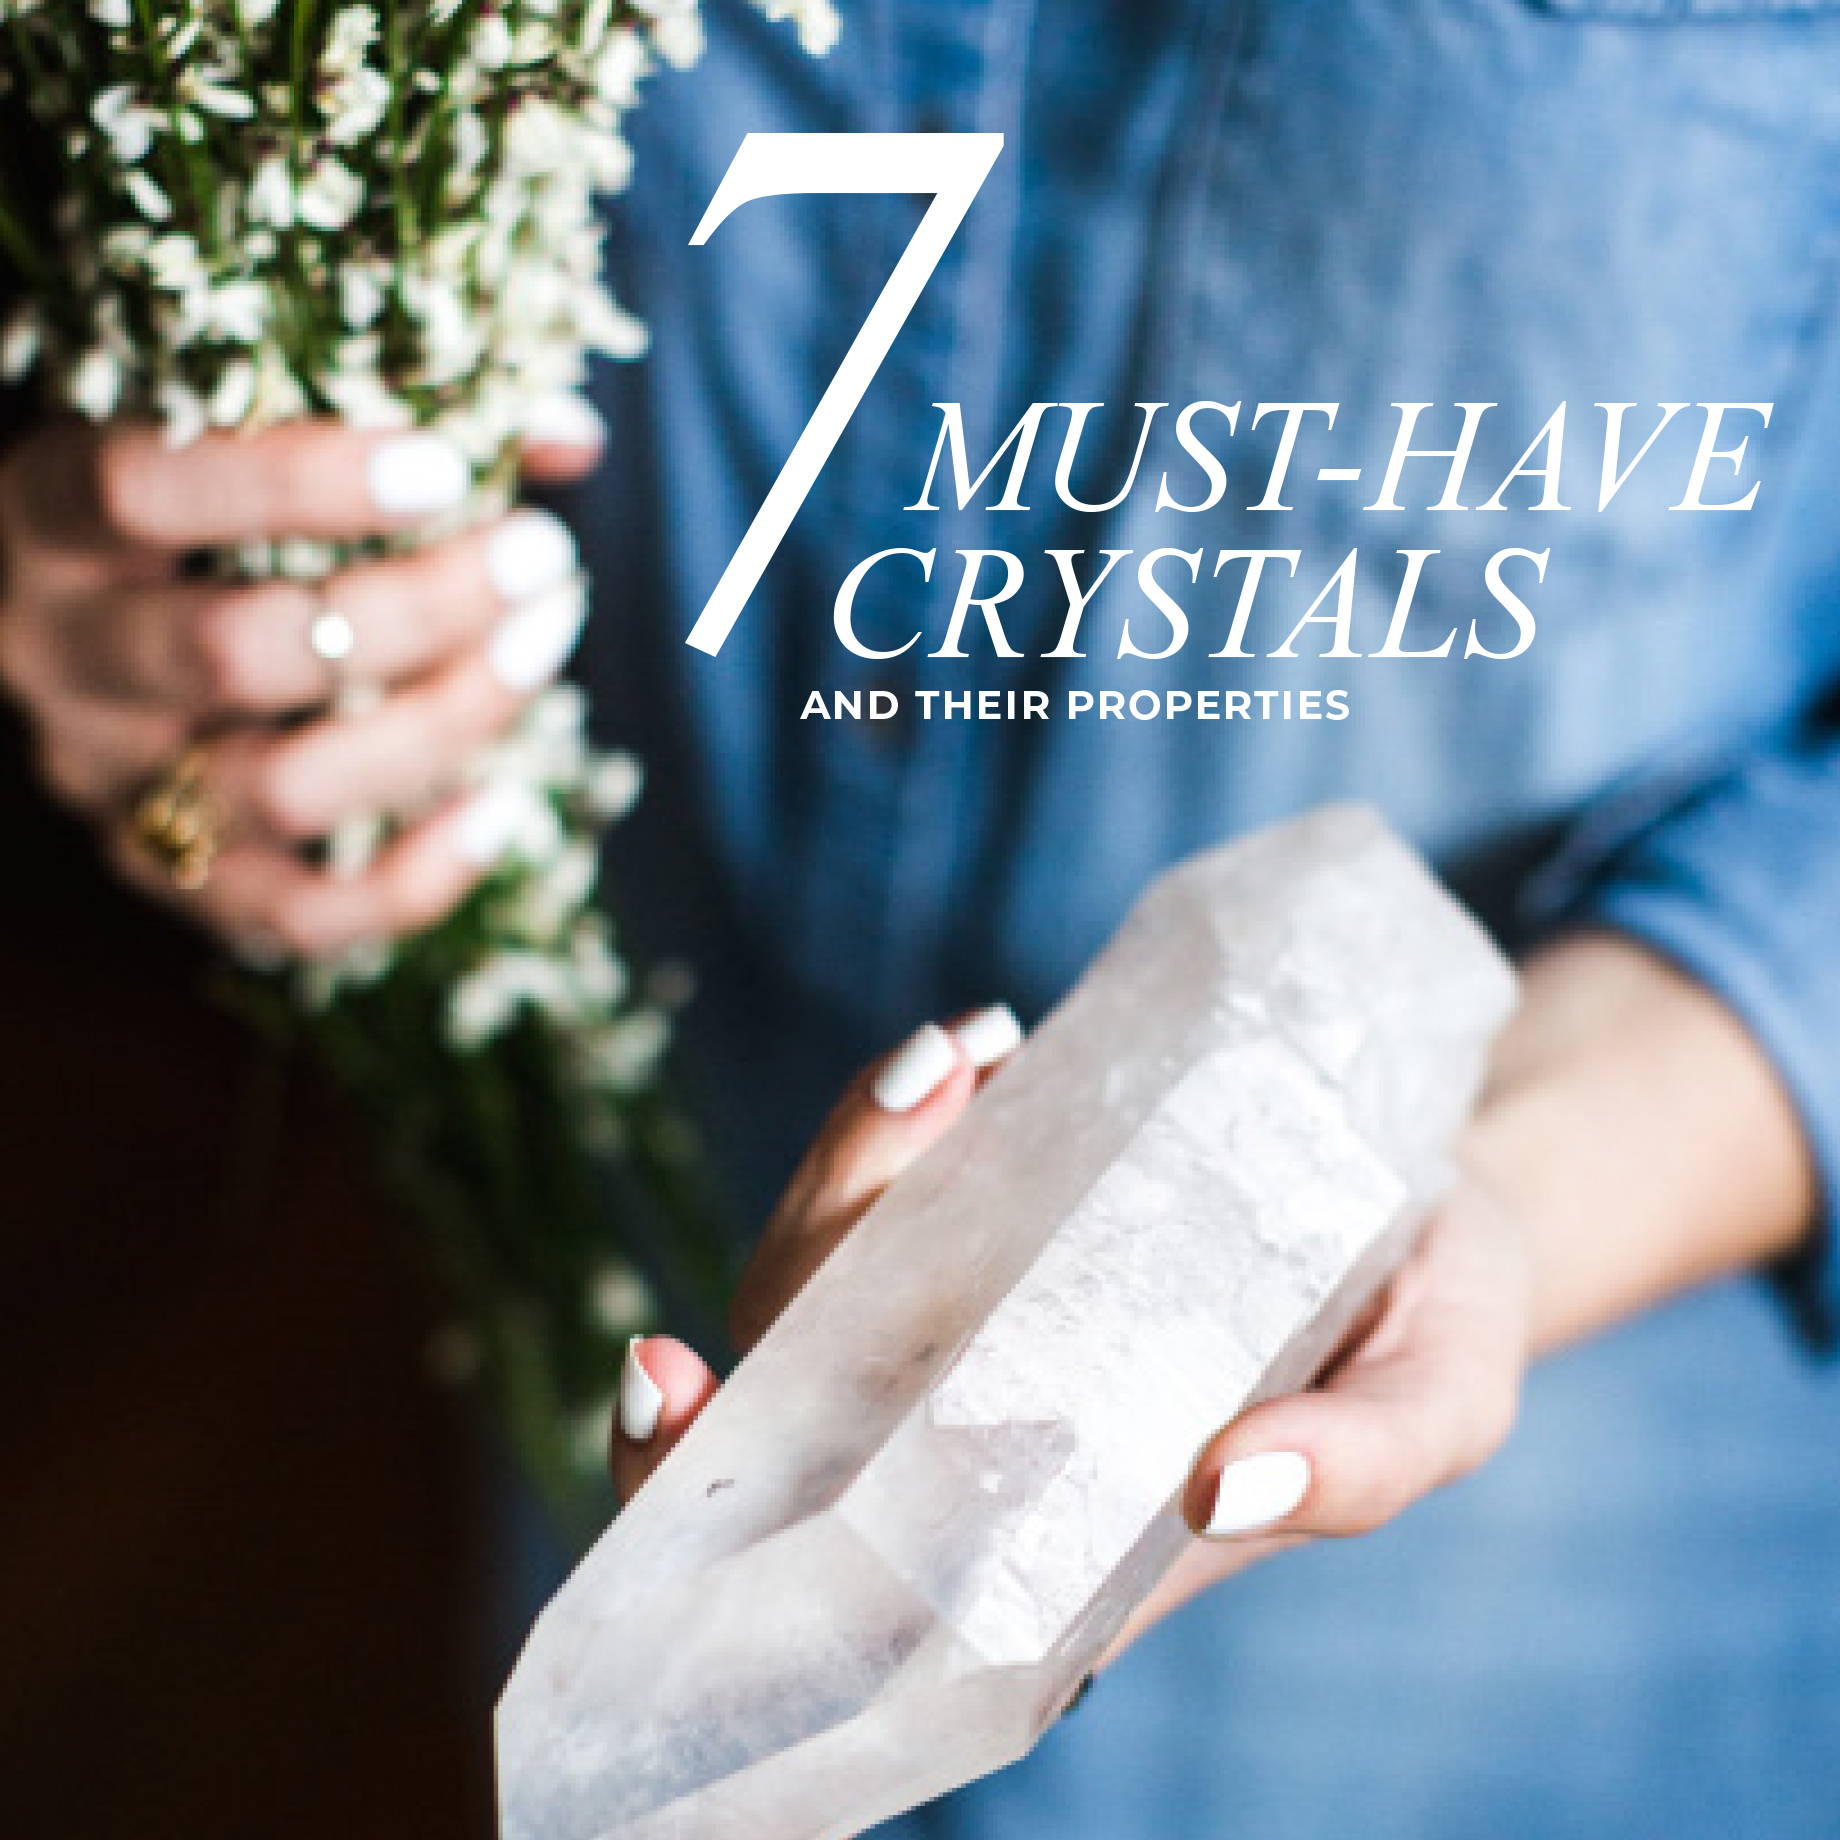 Events at our Chattanooga Crystal Store